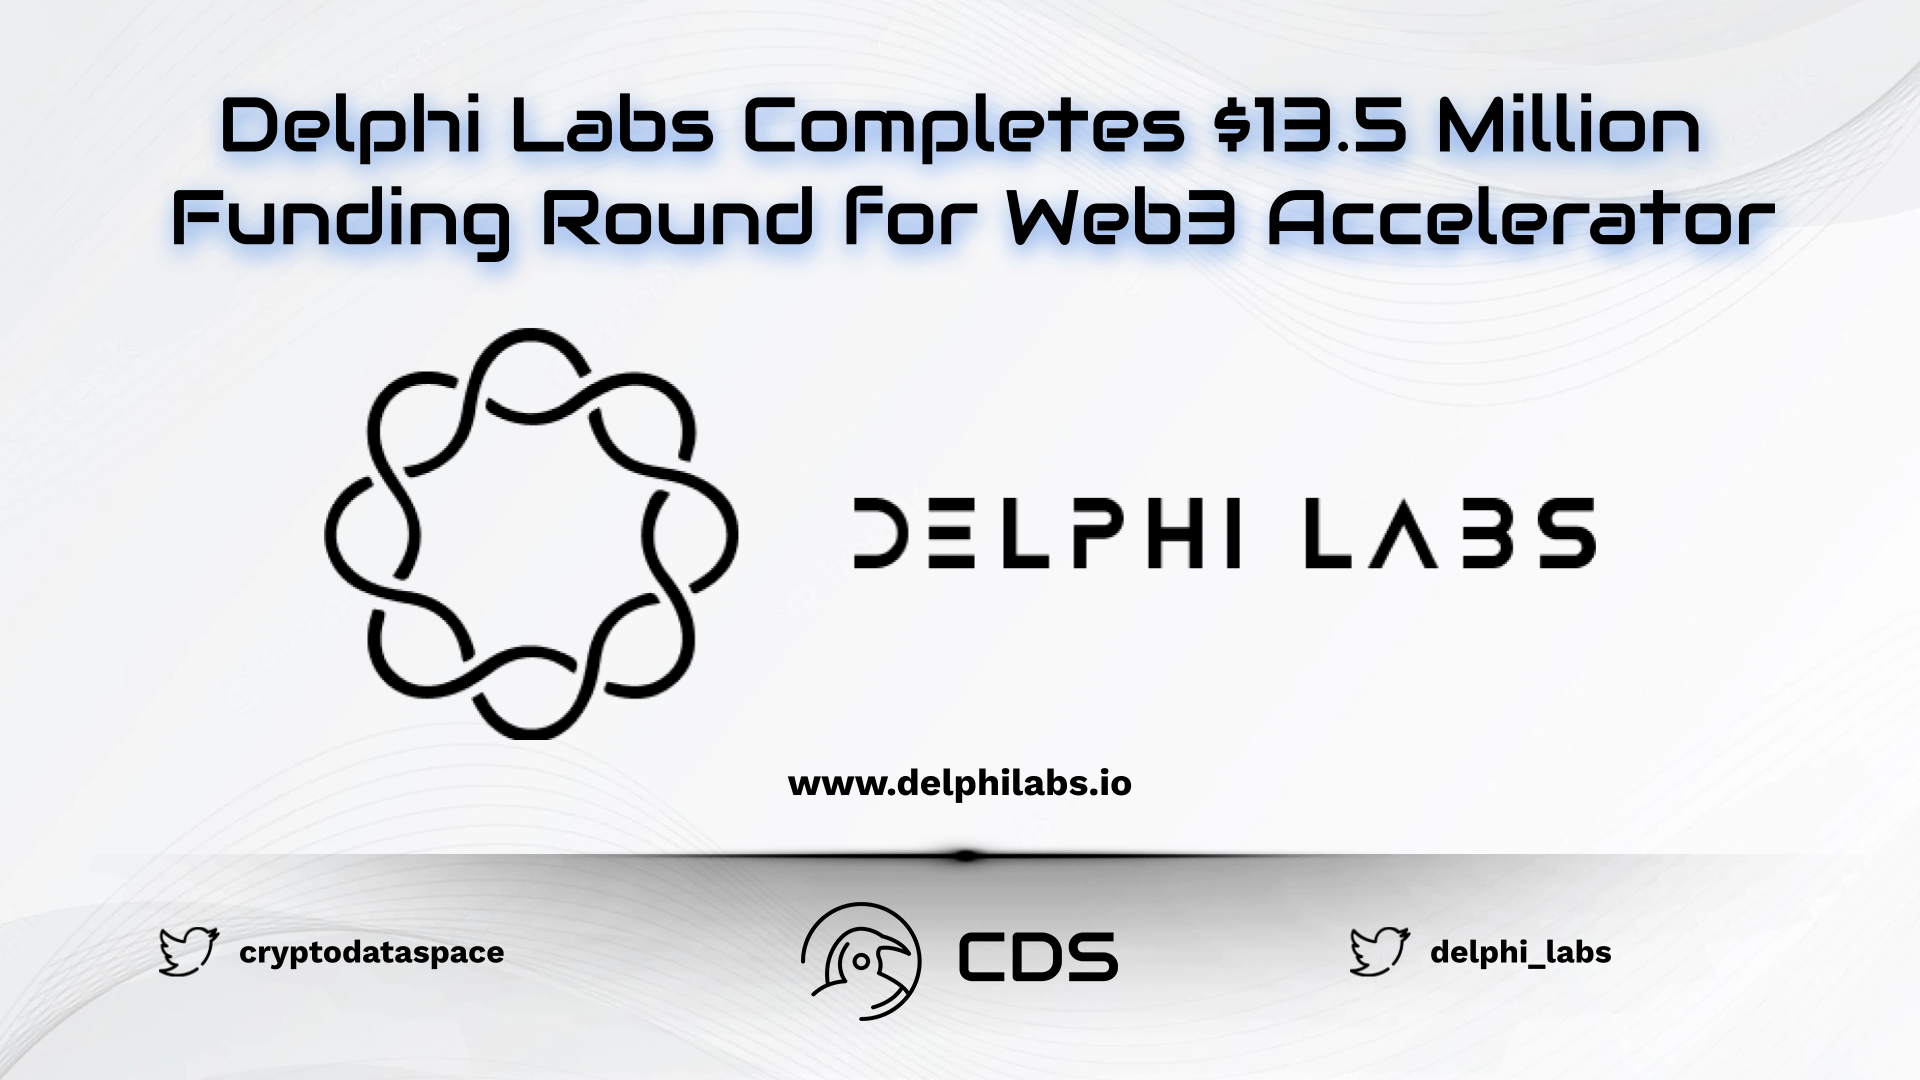 Delphi Labs Completes $13.5 Million Funding Round for Web3 Accelerator